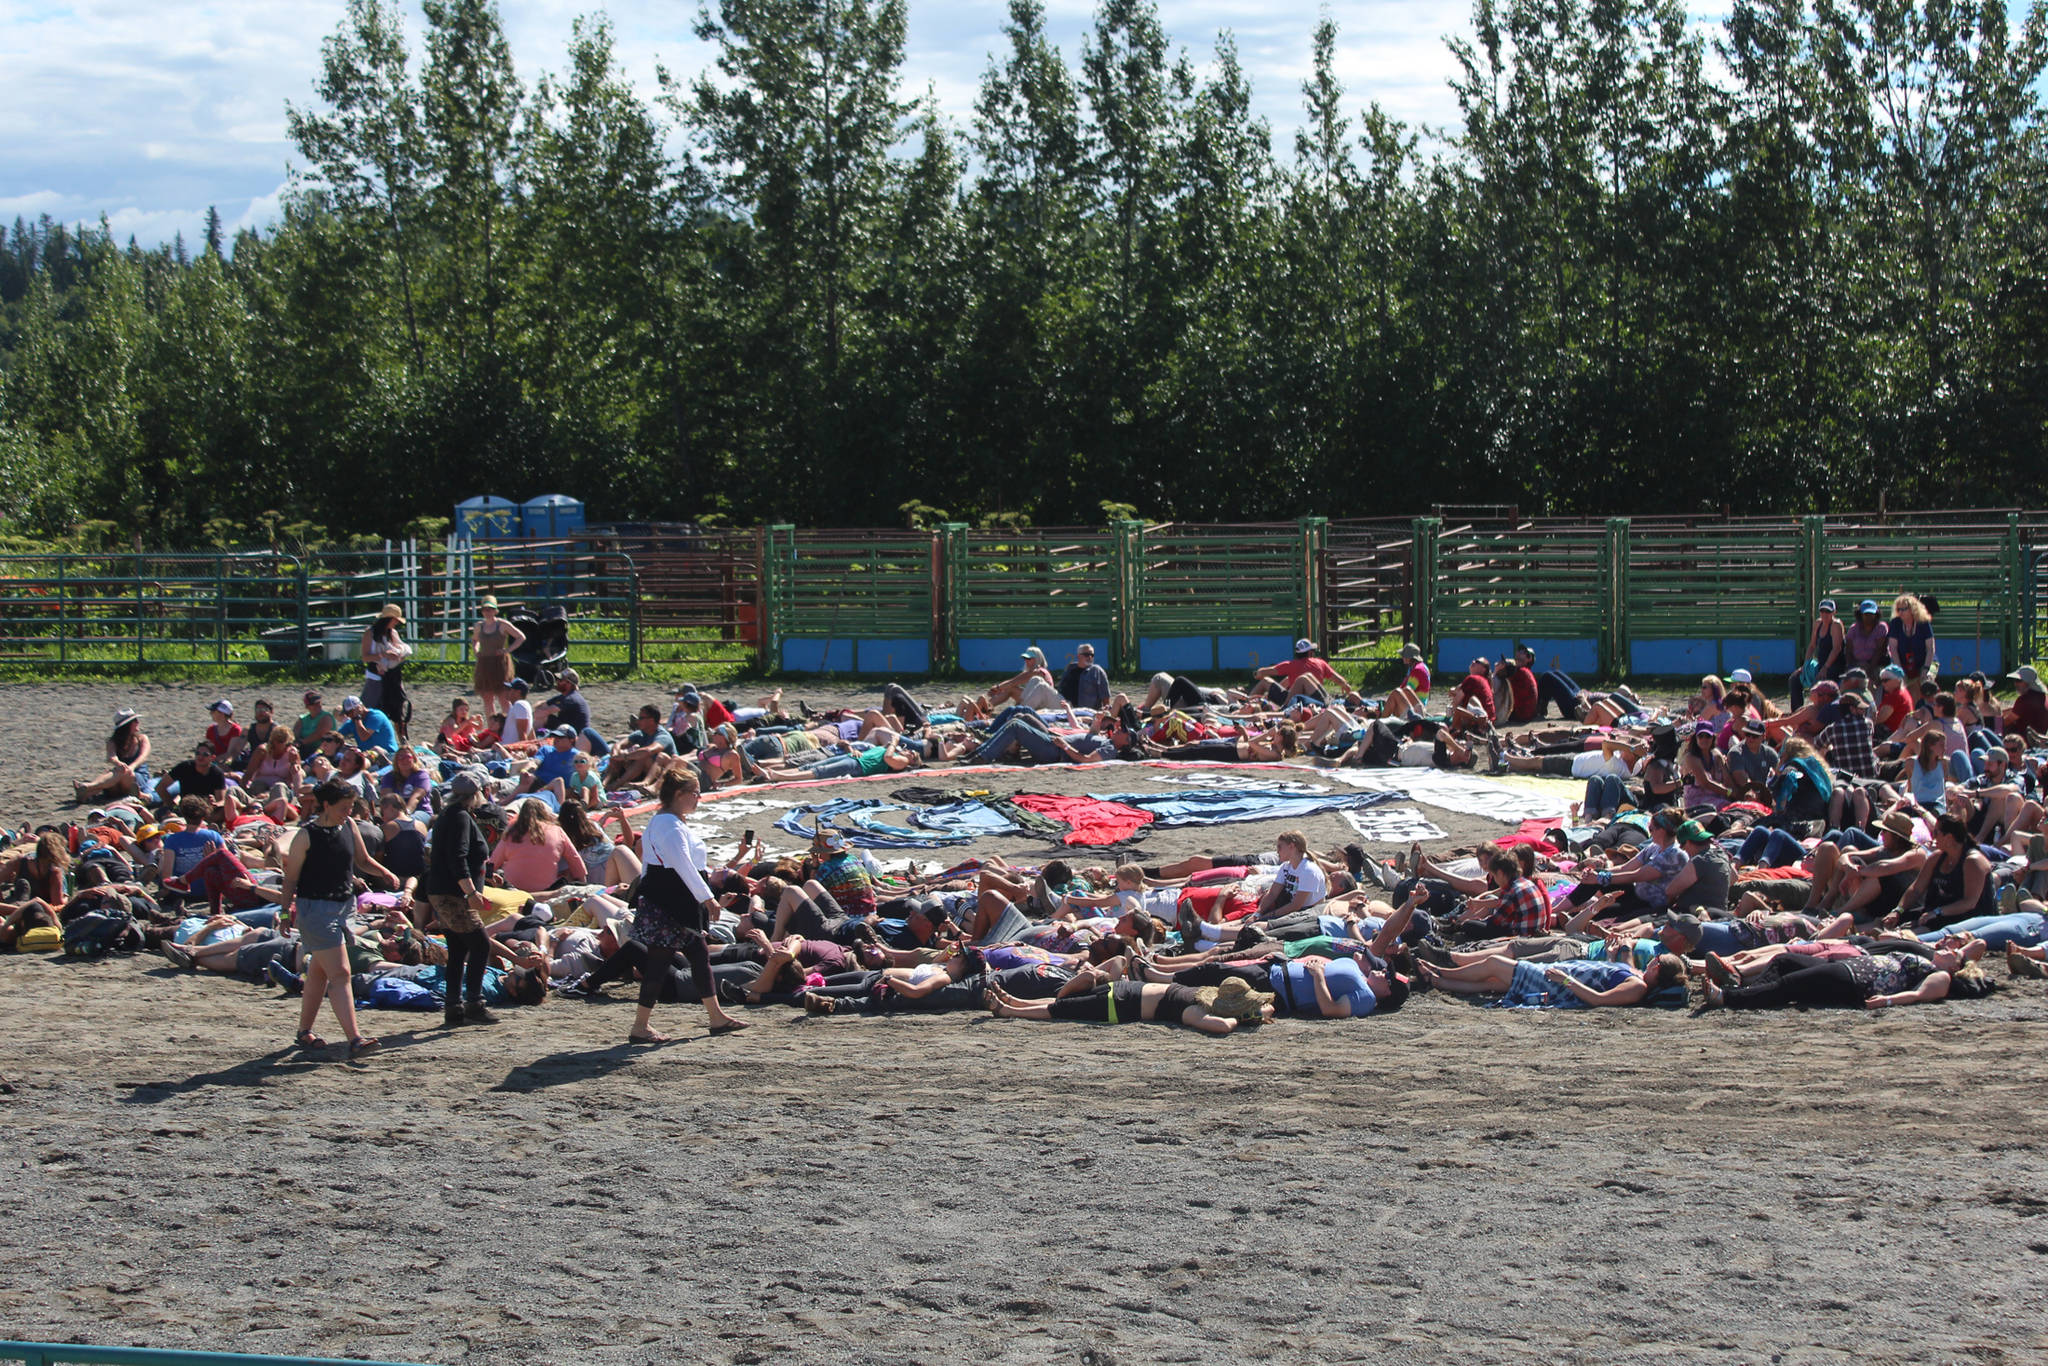 Volunteers and festival goers take their places on the ground to be part of this year’s art installation at Salmonfest on Saturday, Aug. 4, 2018 in Ninilchik, Alaska. Coordinated each year by Homer artist Mavis Muller, the project is a human and fabric mosaic piece which always includes a message about the importance of salmon and water. The installation is completed by being photographed from above by a drone. (Photo by Megan Pacer/Homer News)